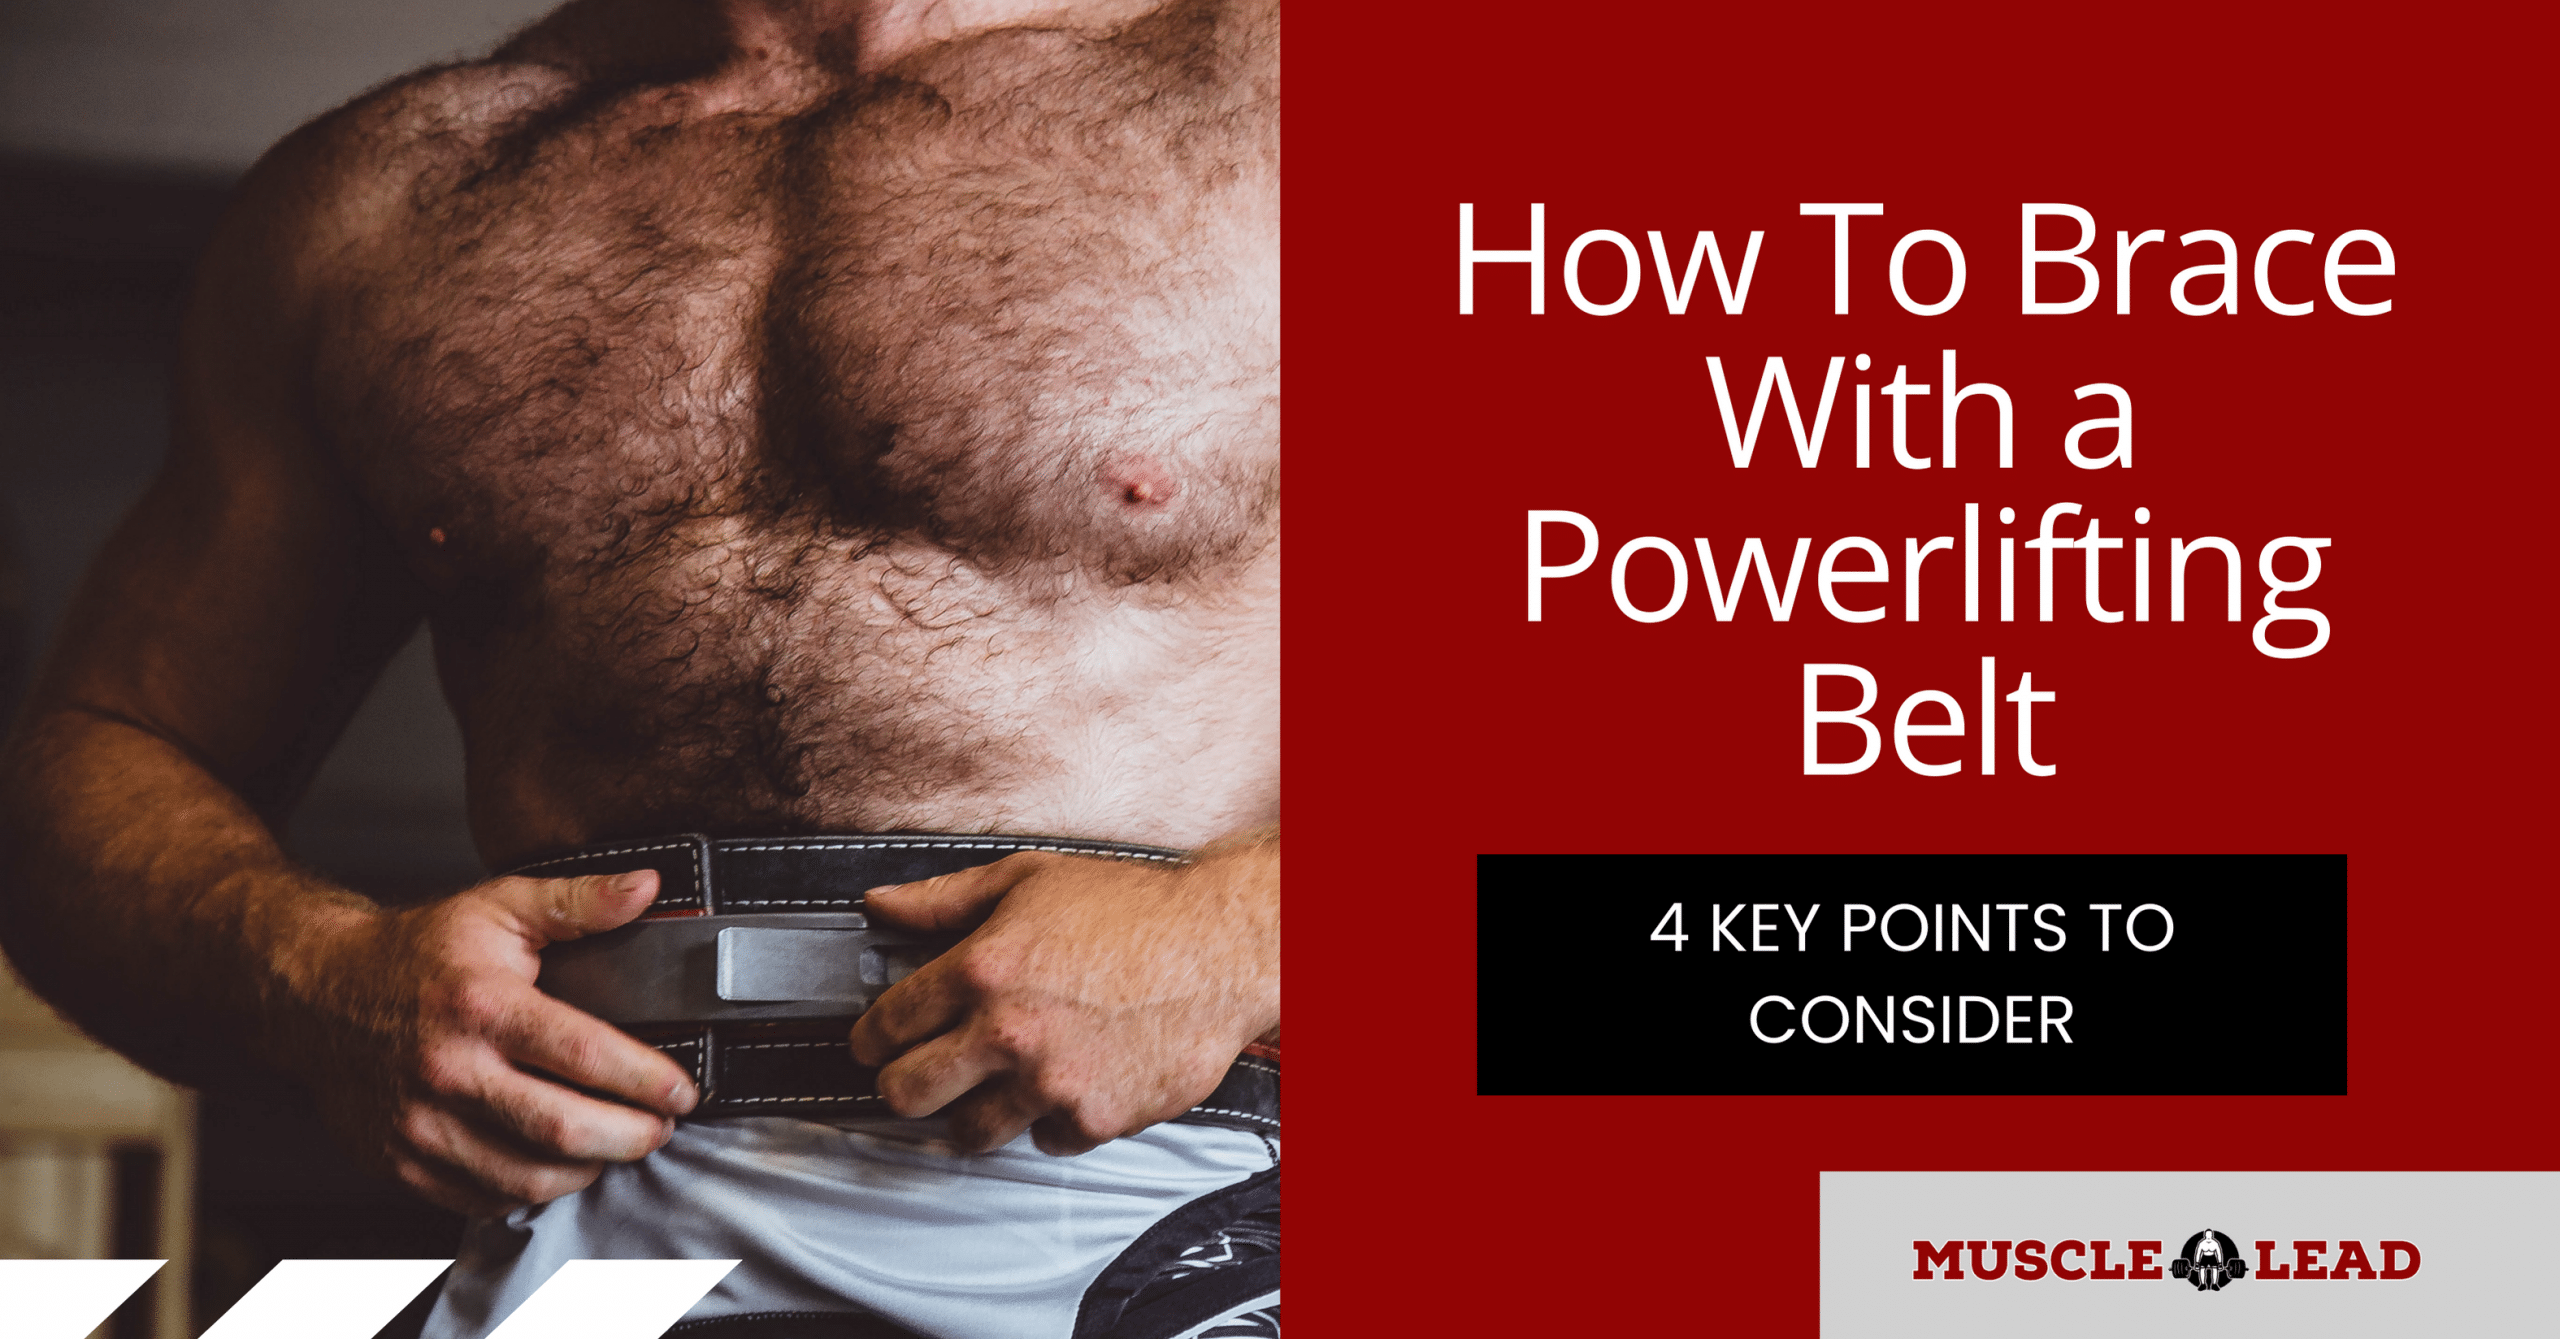 How to brace with a powerlifting belt. A shirtless man wearing a lifting belt